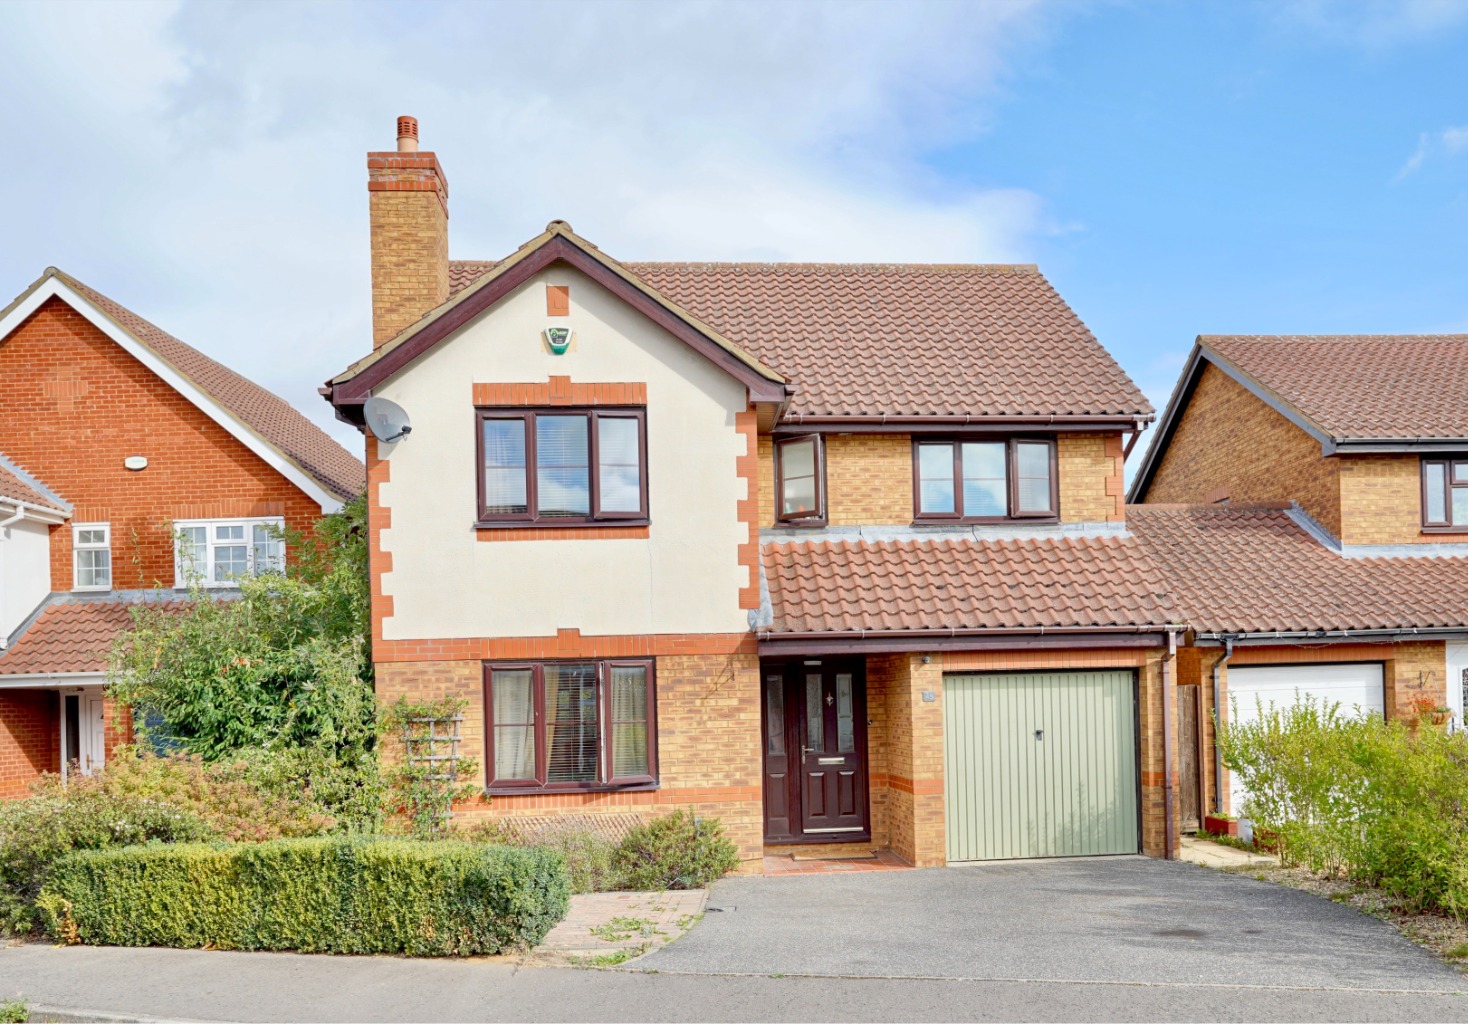 4 bed detached house for sale in Lomax Drive, Huntingdon 0